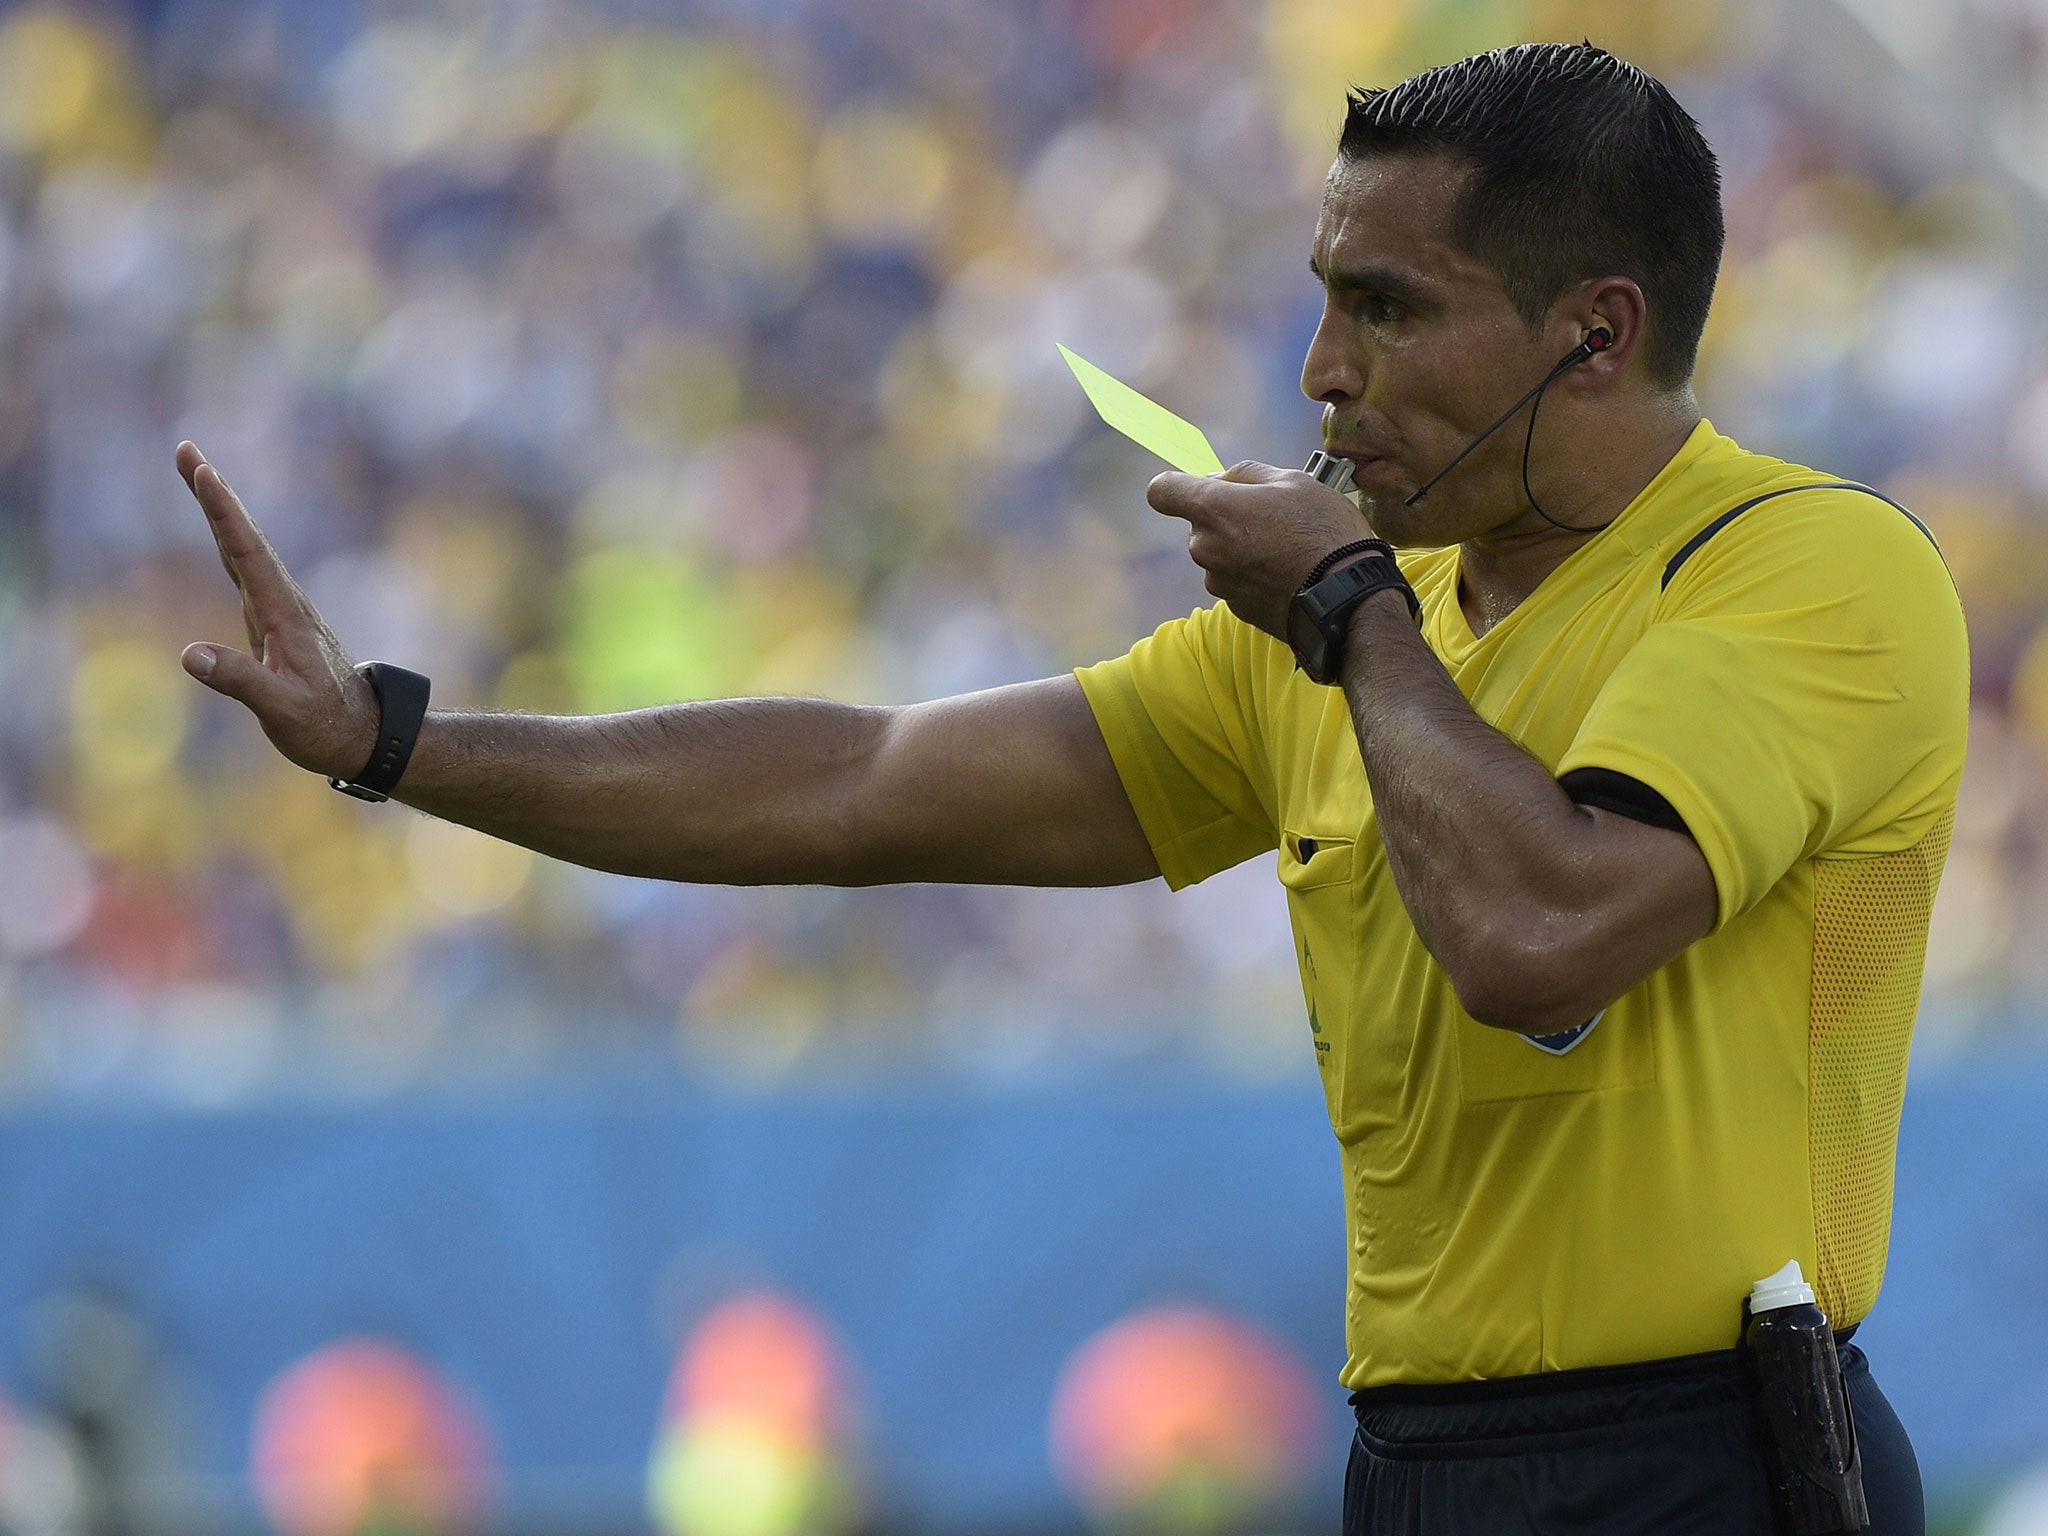 Mexican referee Marco Rodriguez has been warned by the Germany coach to 'clamp down' on the kind of fouling seen in the Brazil-Colombia quarter-final tie